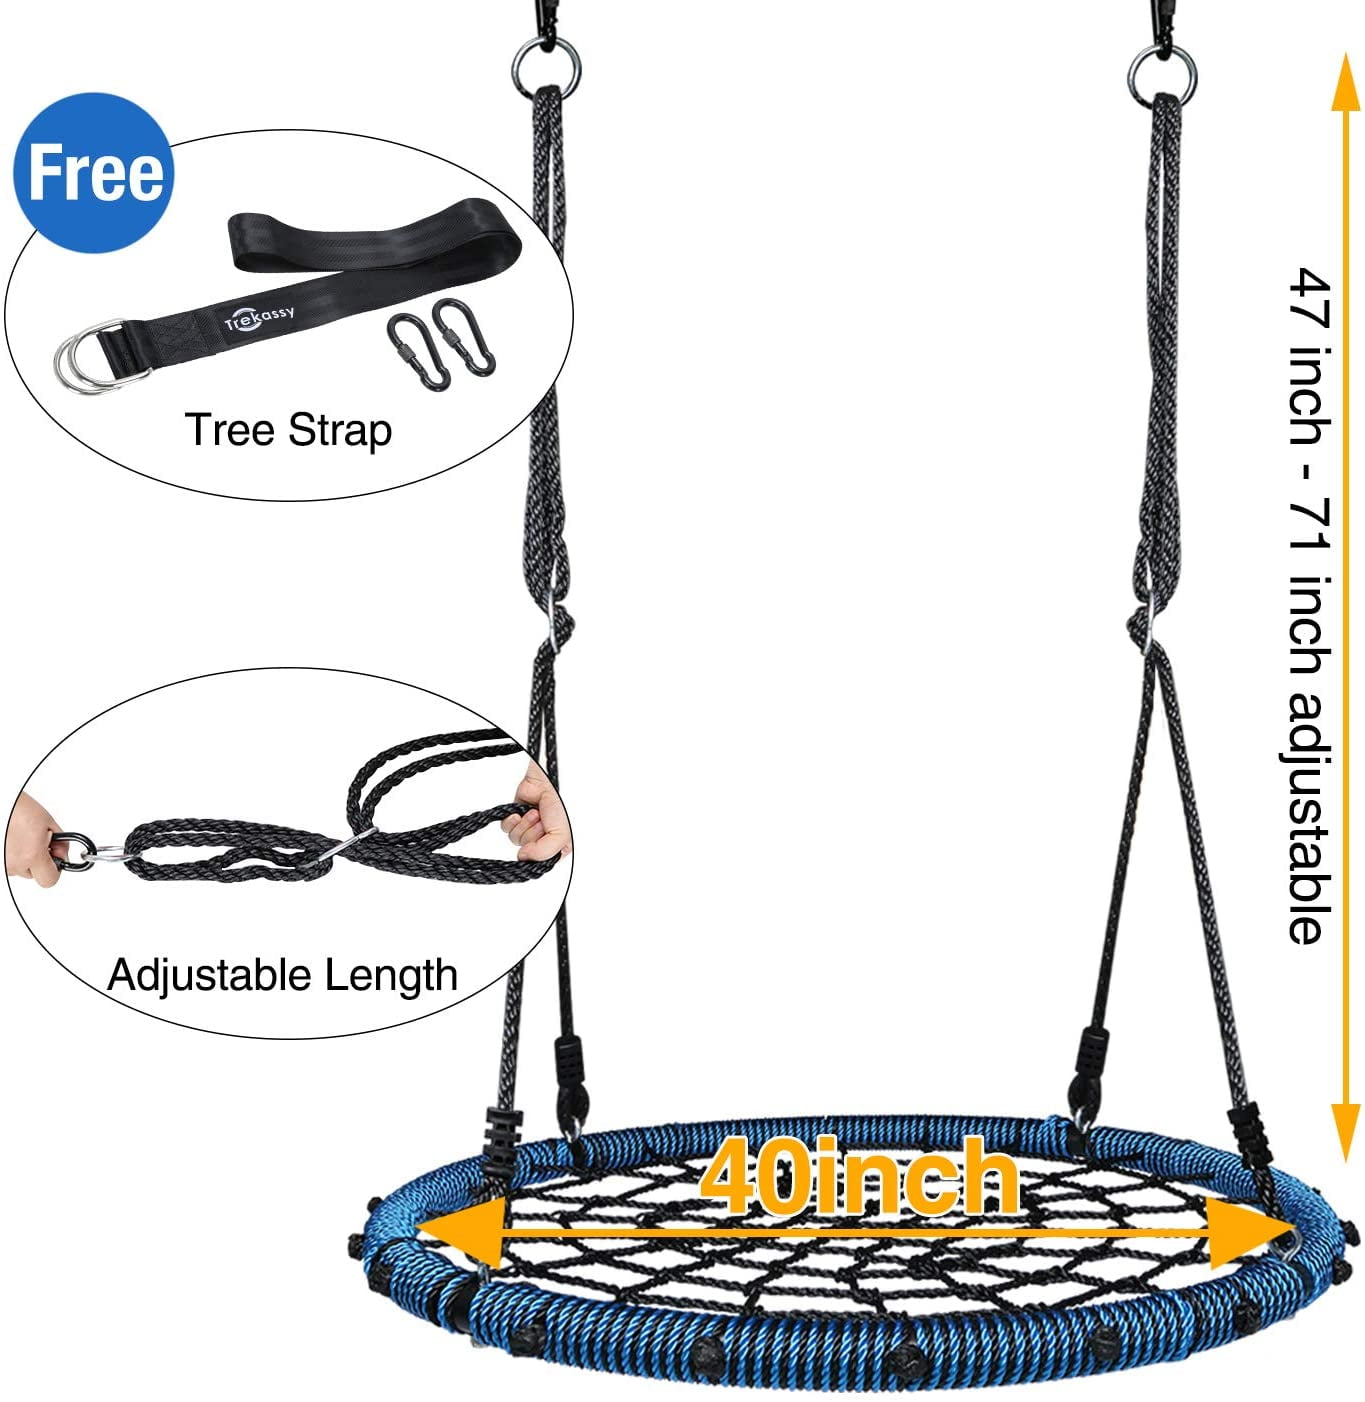 660 lb Spider Web Swing 40 inch for Tree Kids with Steel Frame 2 Hanging Straps 